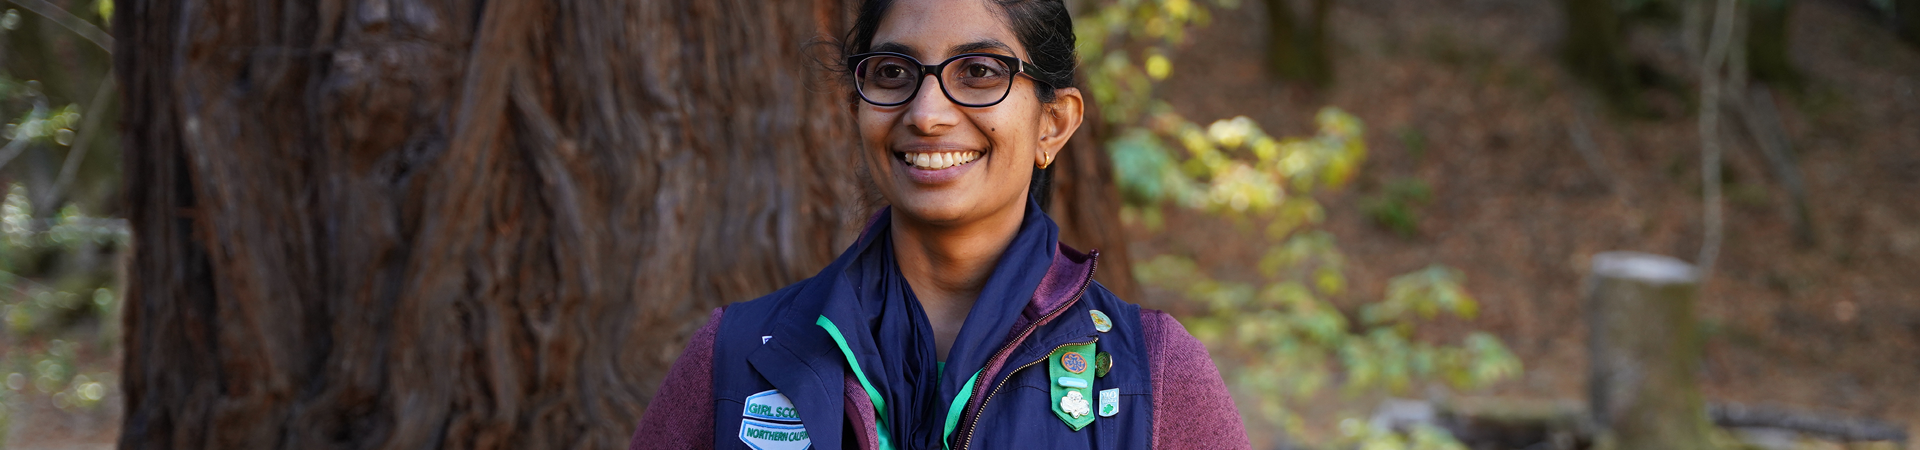  adult woman girl scout volunteer outdoors smiling 